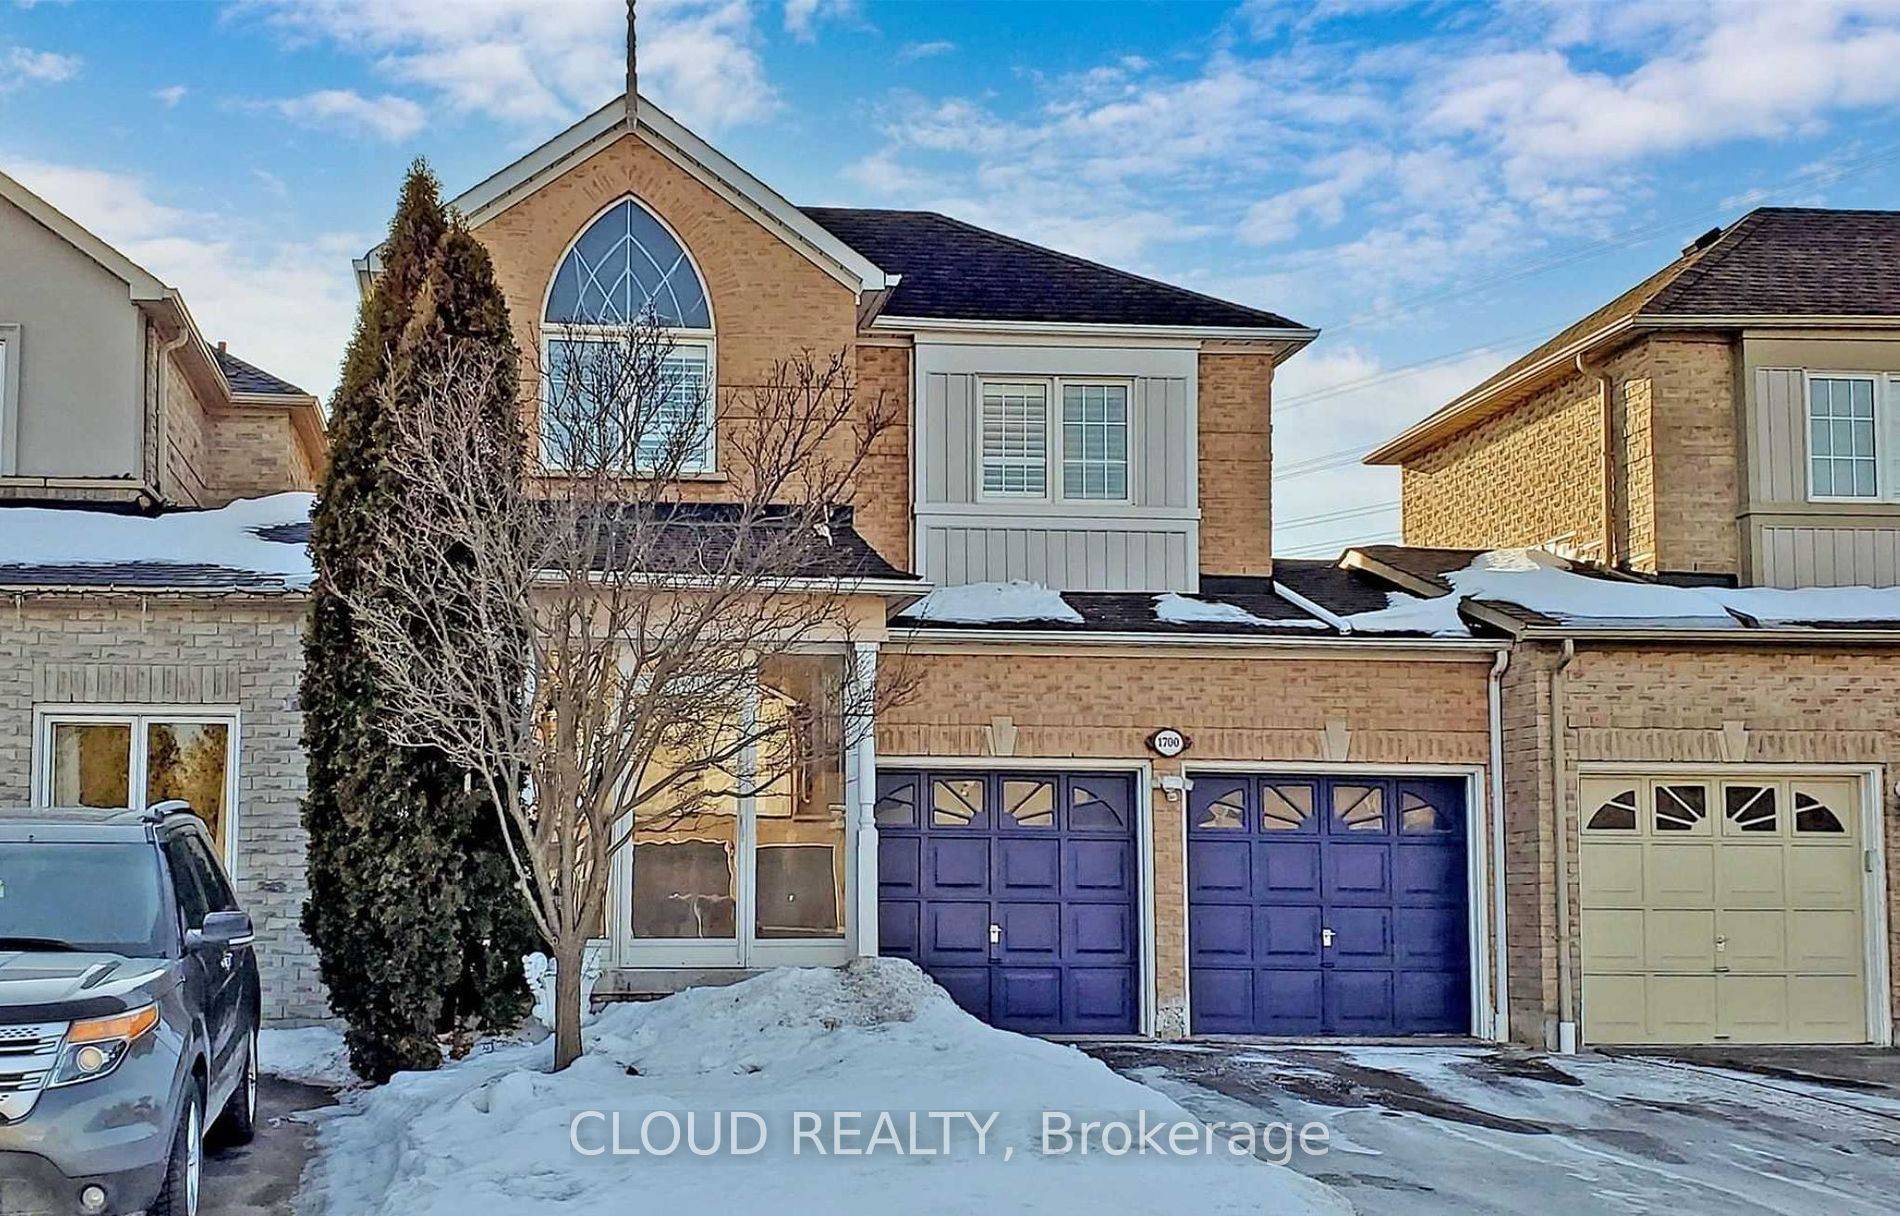 Exceptionally Well Kept Detached House With 3 1 Bed 4 Bath Located In Sought After Meadowvale Neighborhood Offers An Endless List Of Features.